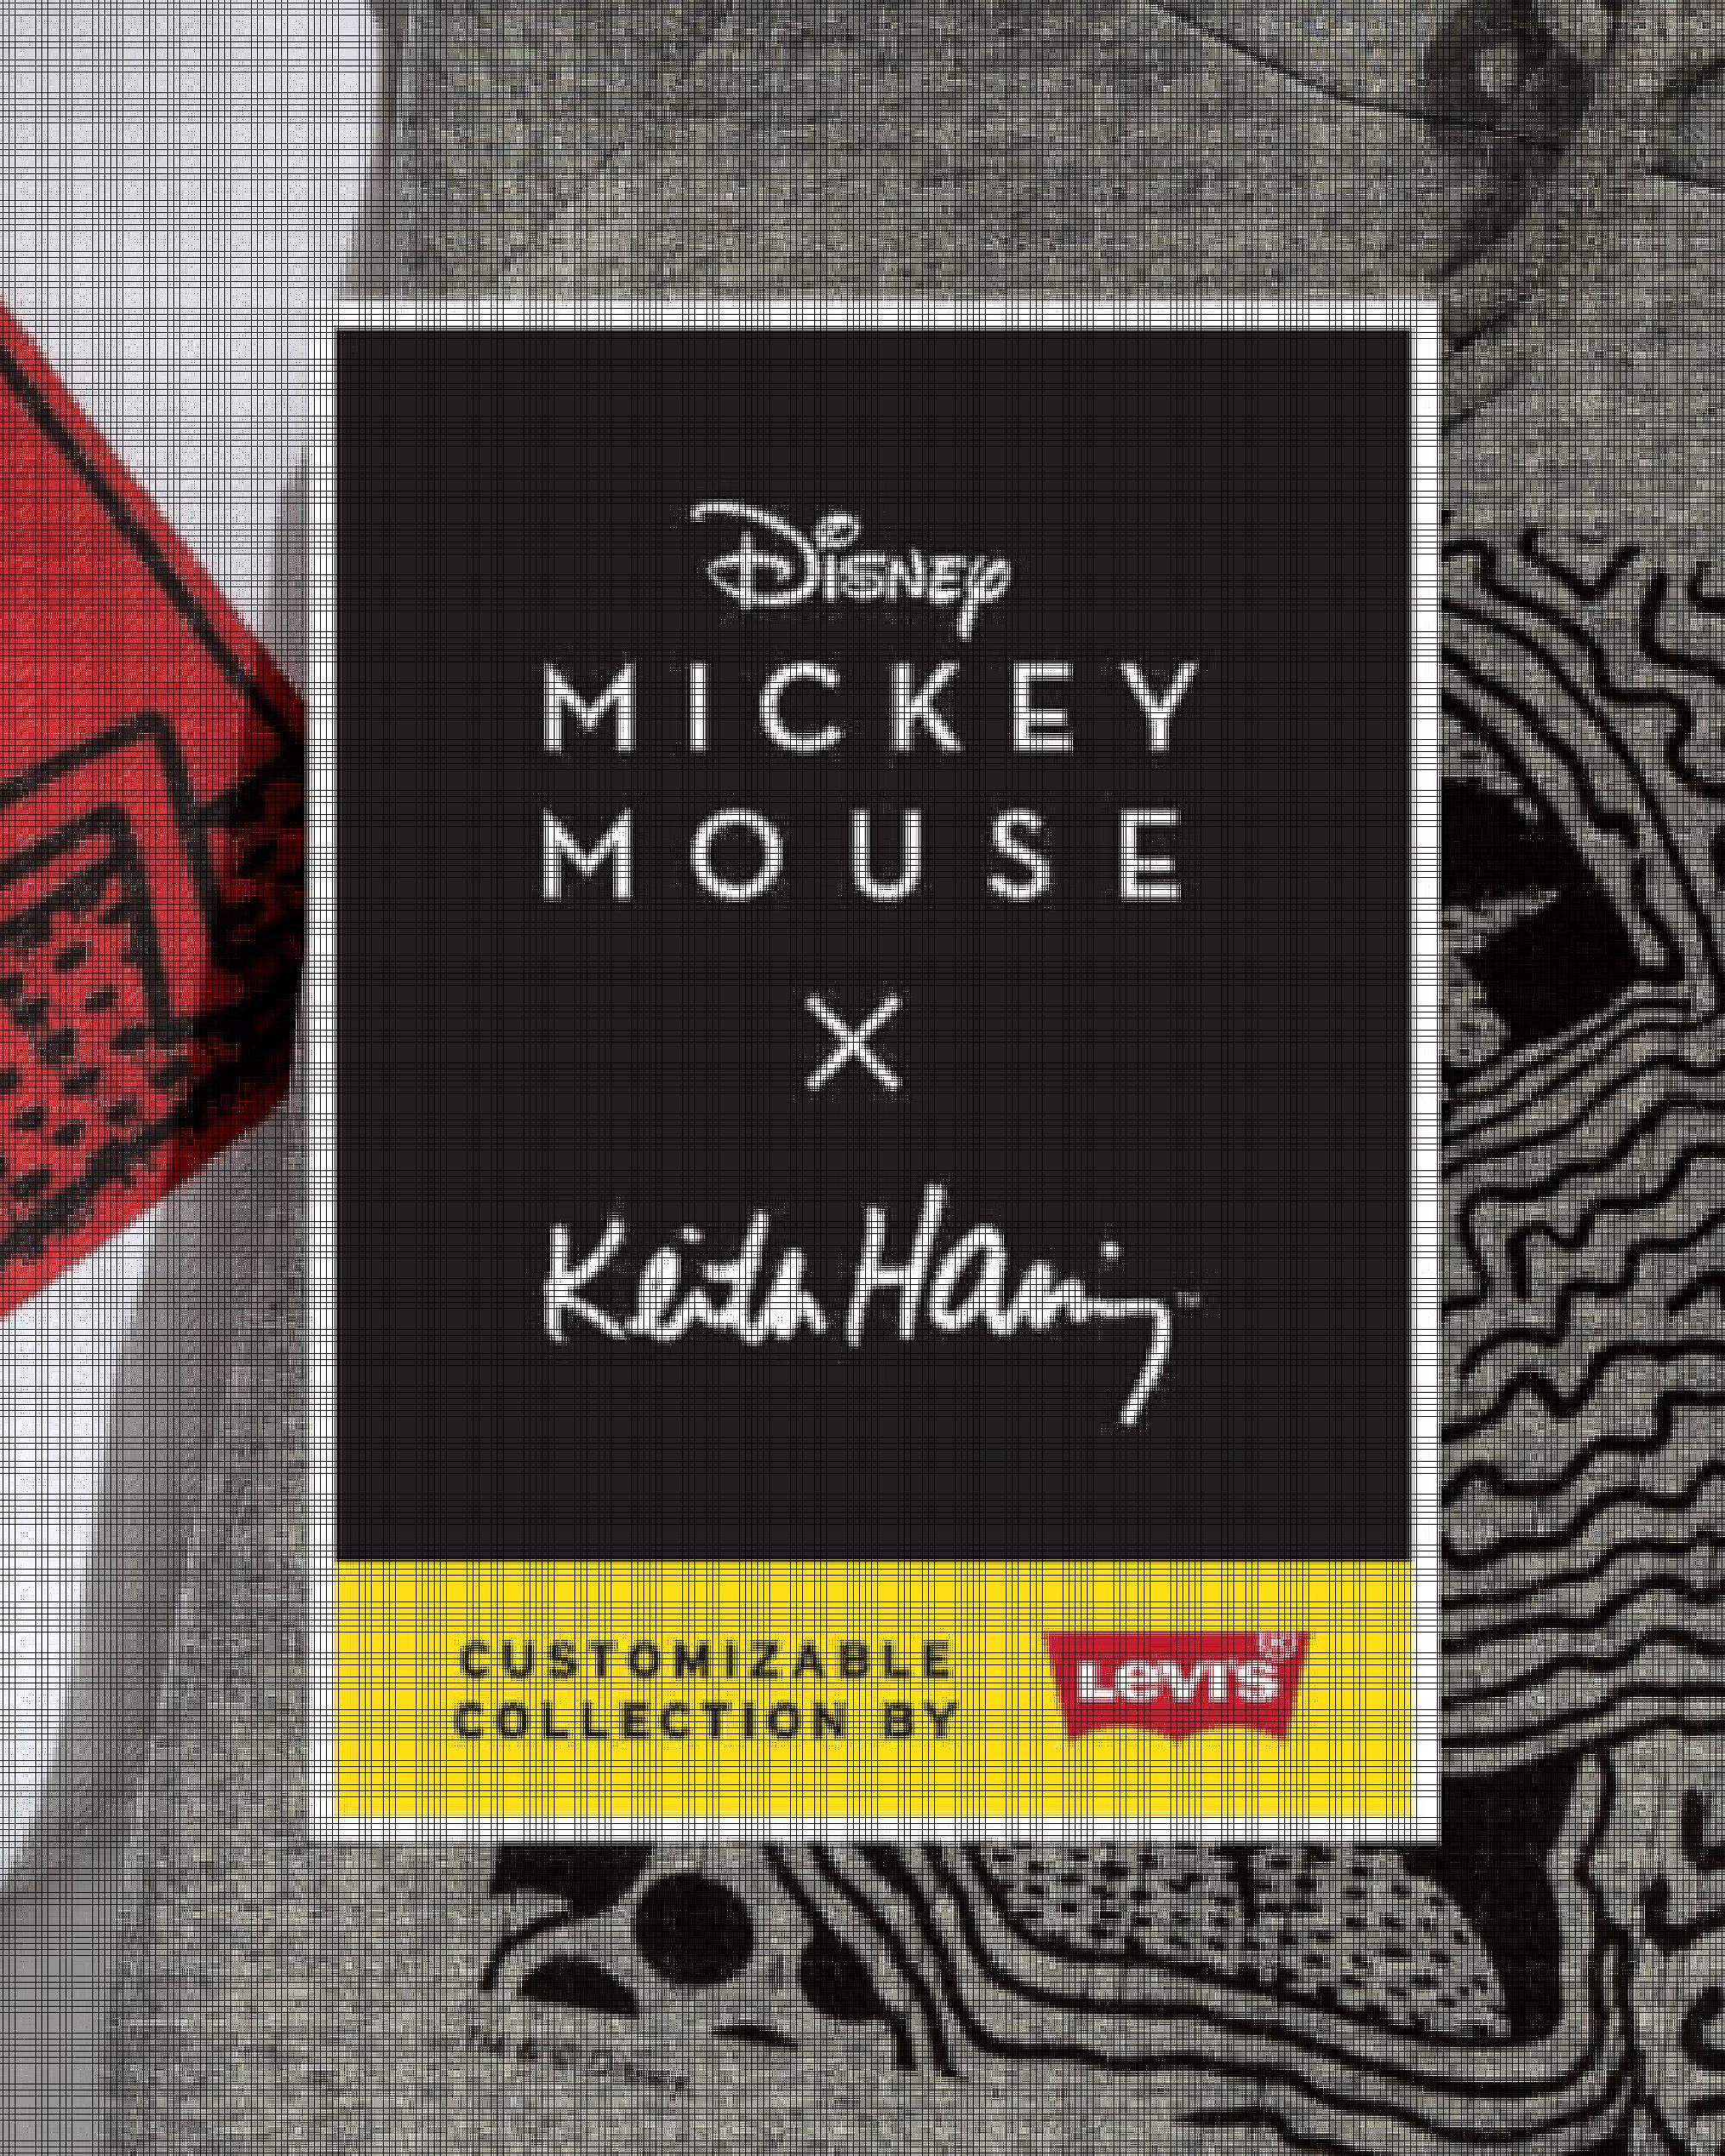 Product from the customizable collaboration by Levi's for Disney Mickey Mouse x Keith Haring